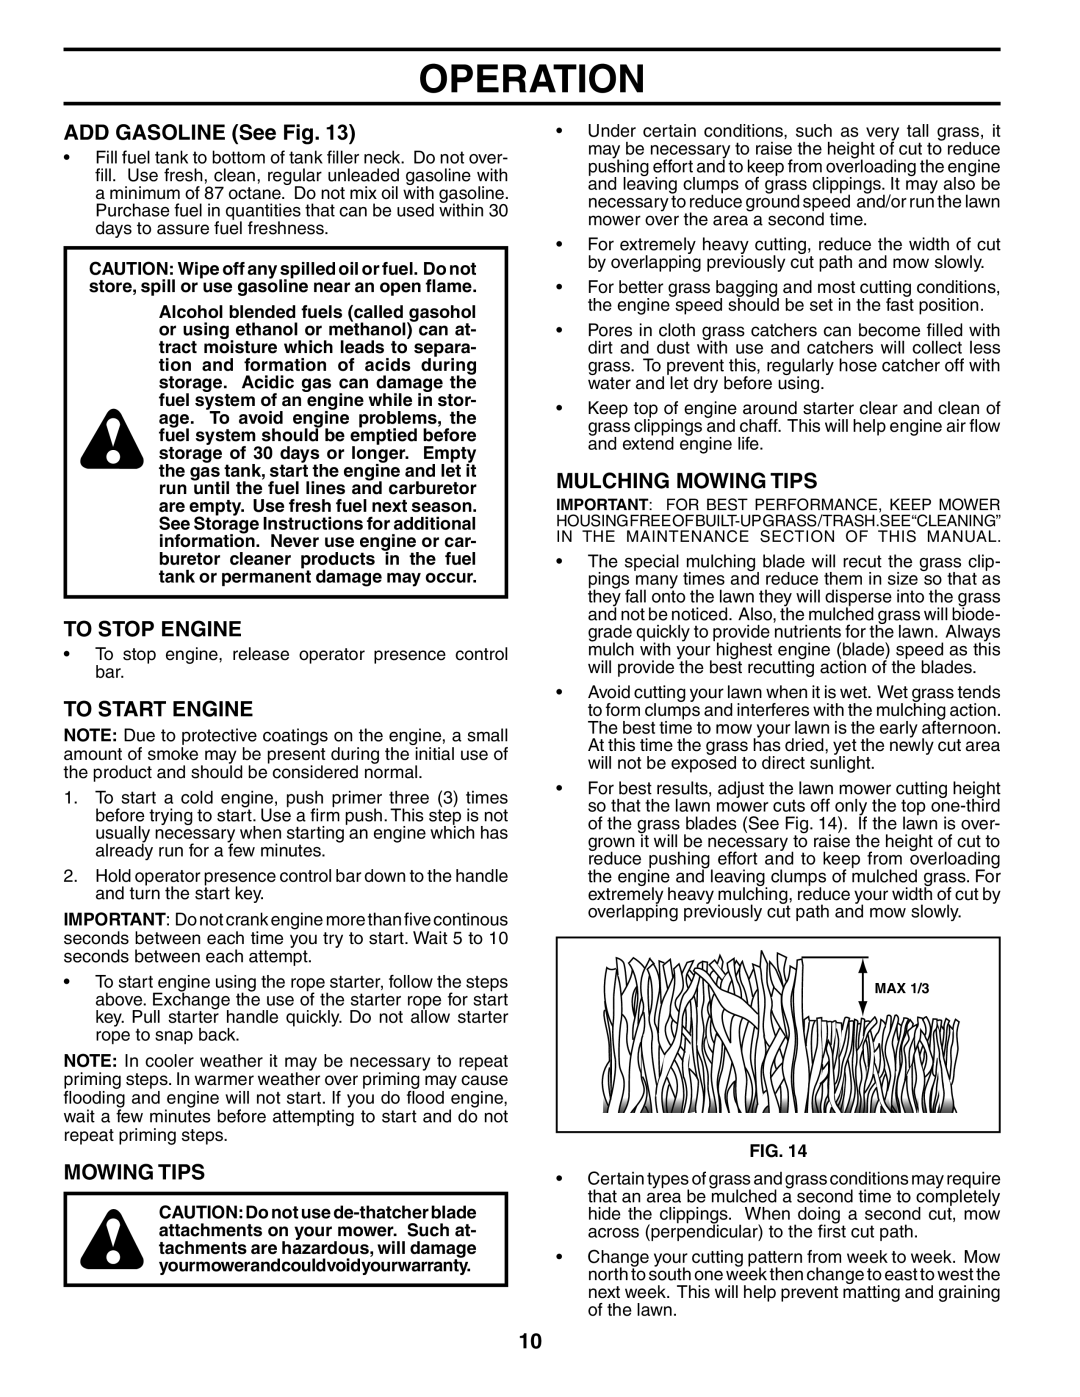 Husqvarna 67521HVE owner manual ADD GASOLINE See Fig, To Stop Engine, To Start Engine, Mulching Mowing Tips, Operation 